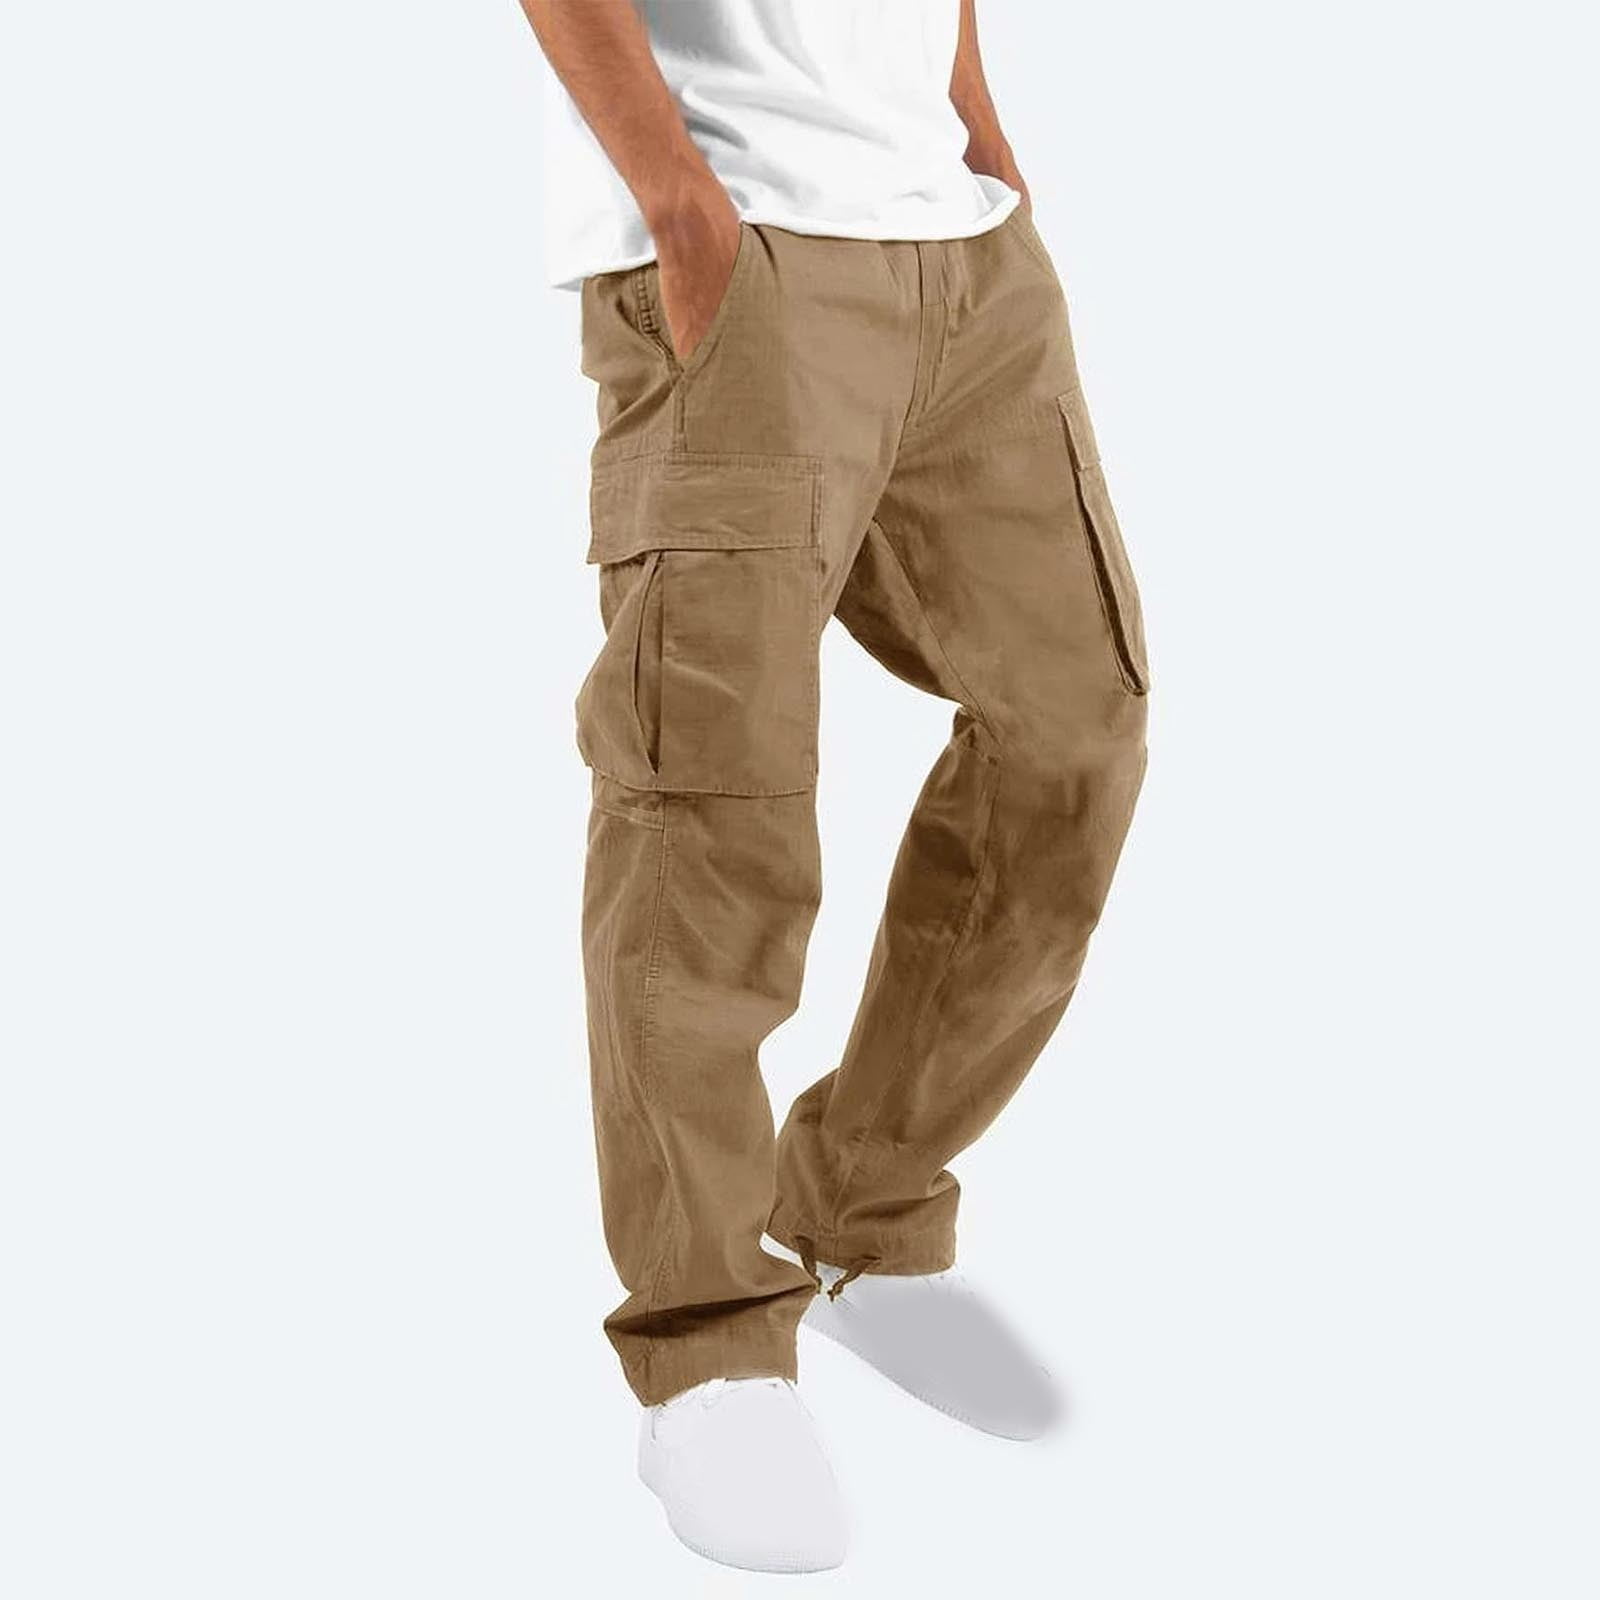 HTNBO Mens Baggy Cargo Pants with Pockets Cotton Wide Leg Hiking Casual ...